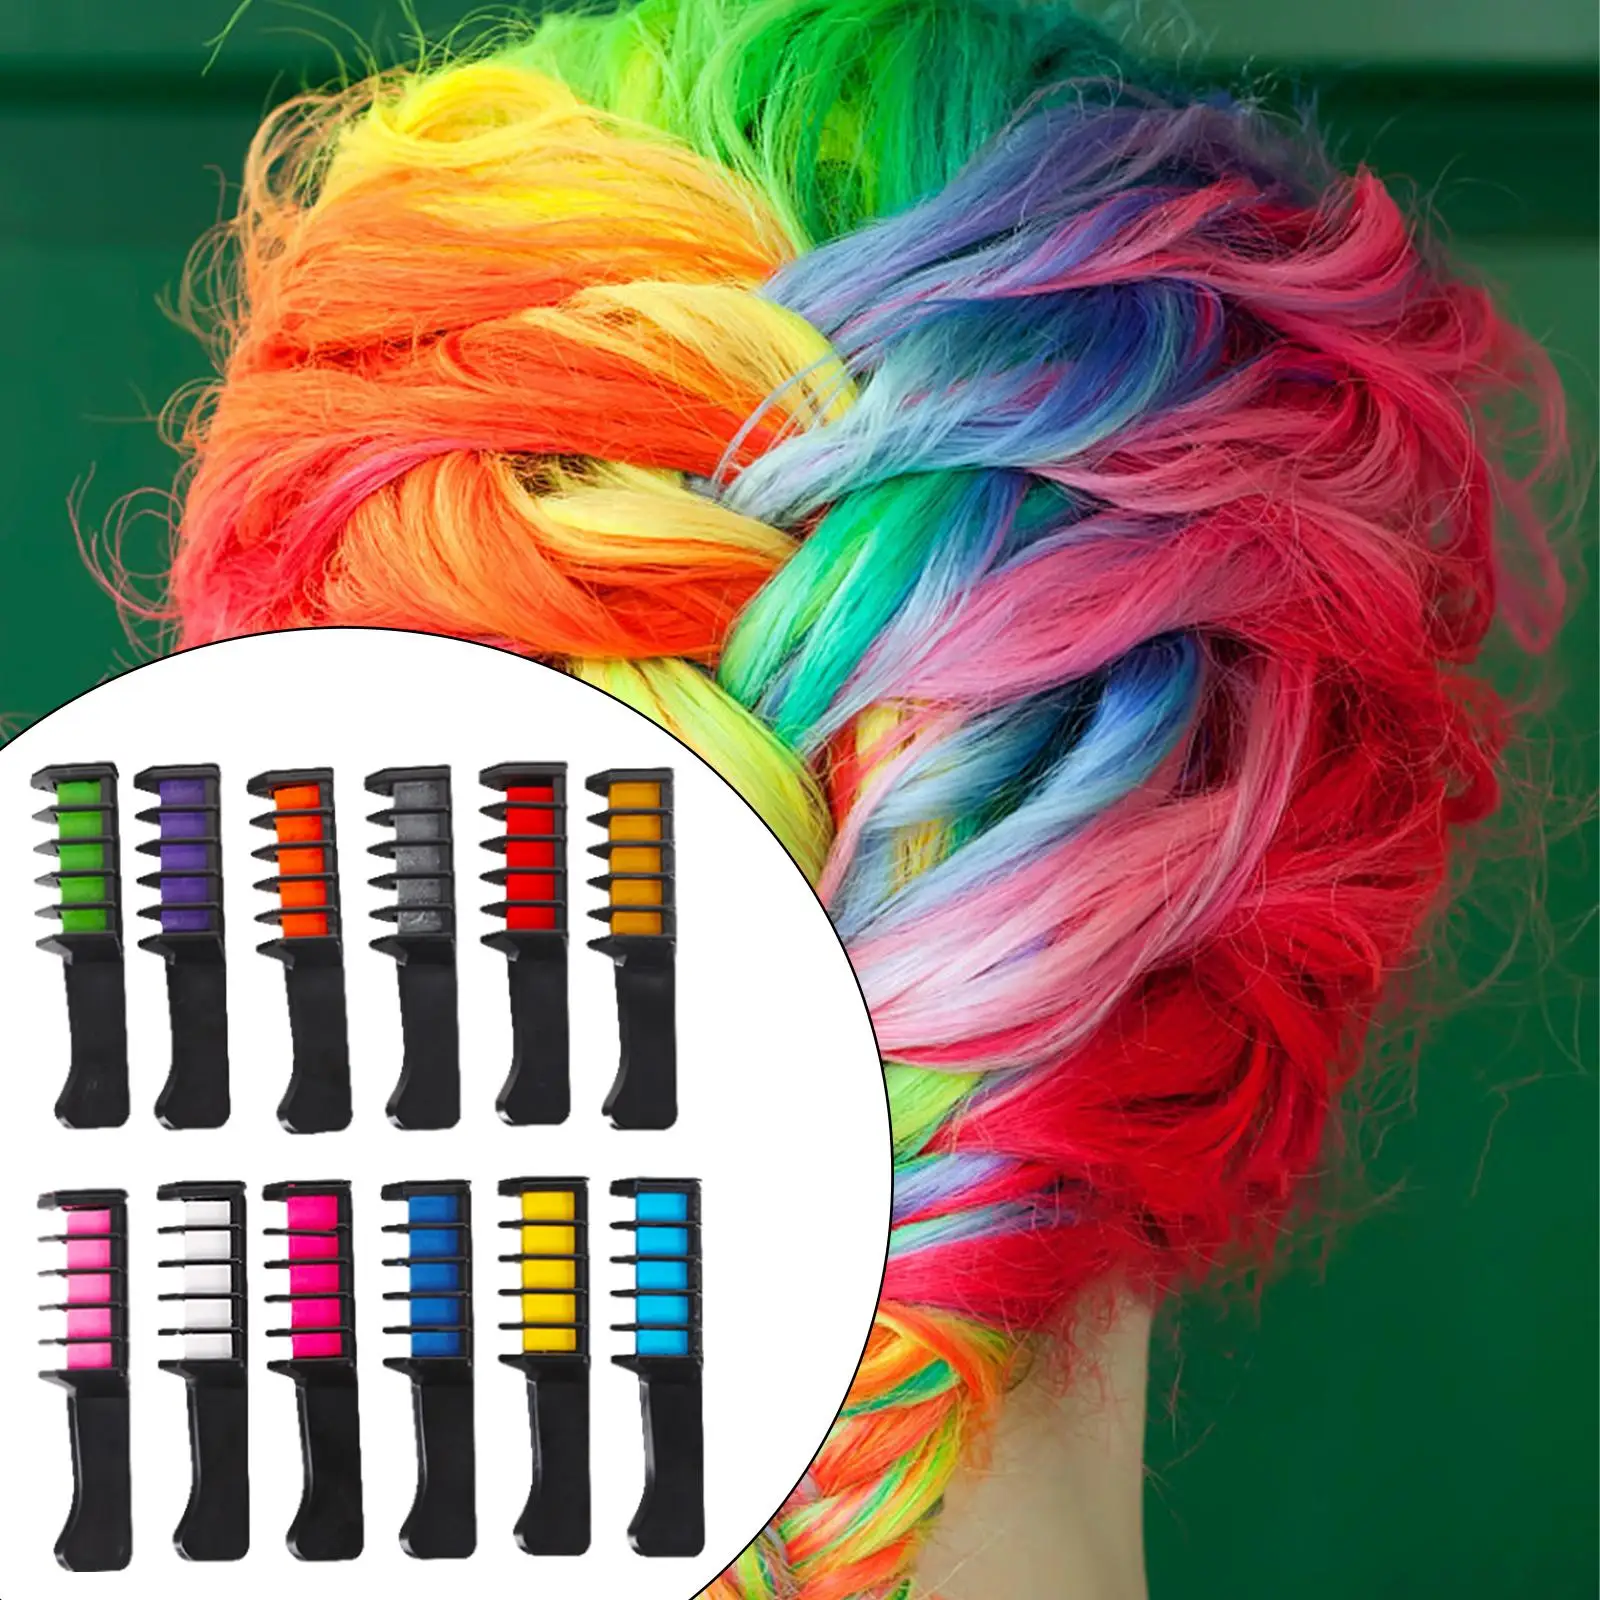 12 Pieces Disposable Dye Hair Combs Washable Temporary Hair Color Chalk Comb Hair Color Comb for Festivals Party Cosplay Makeup